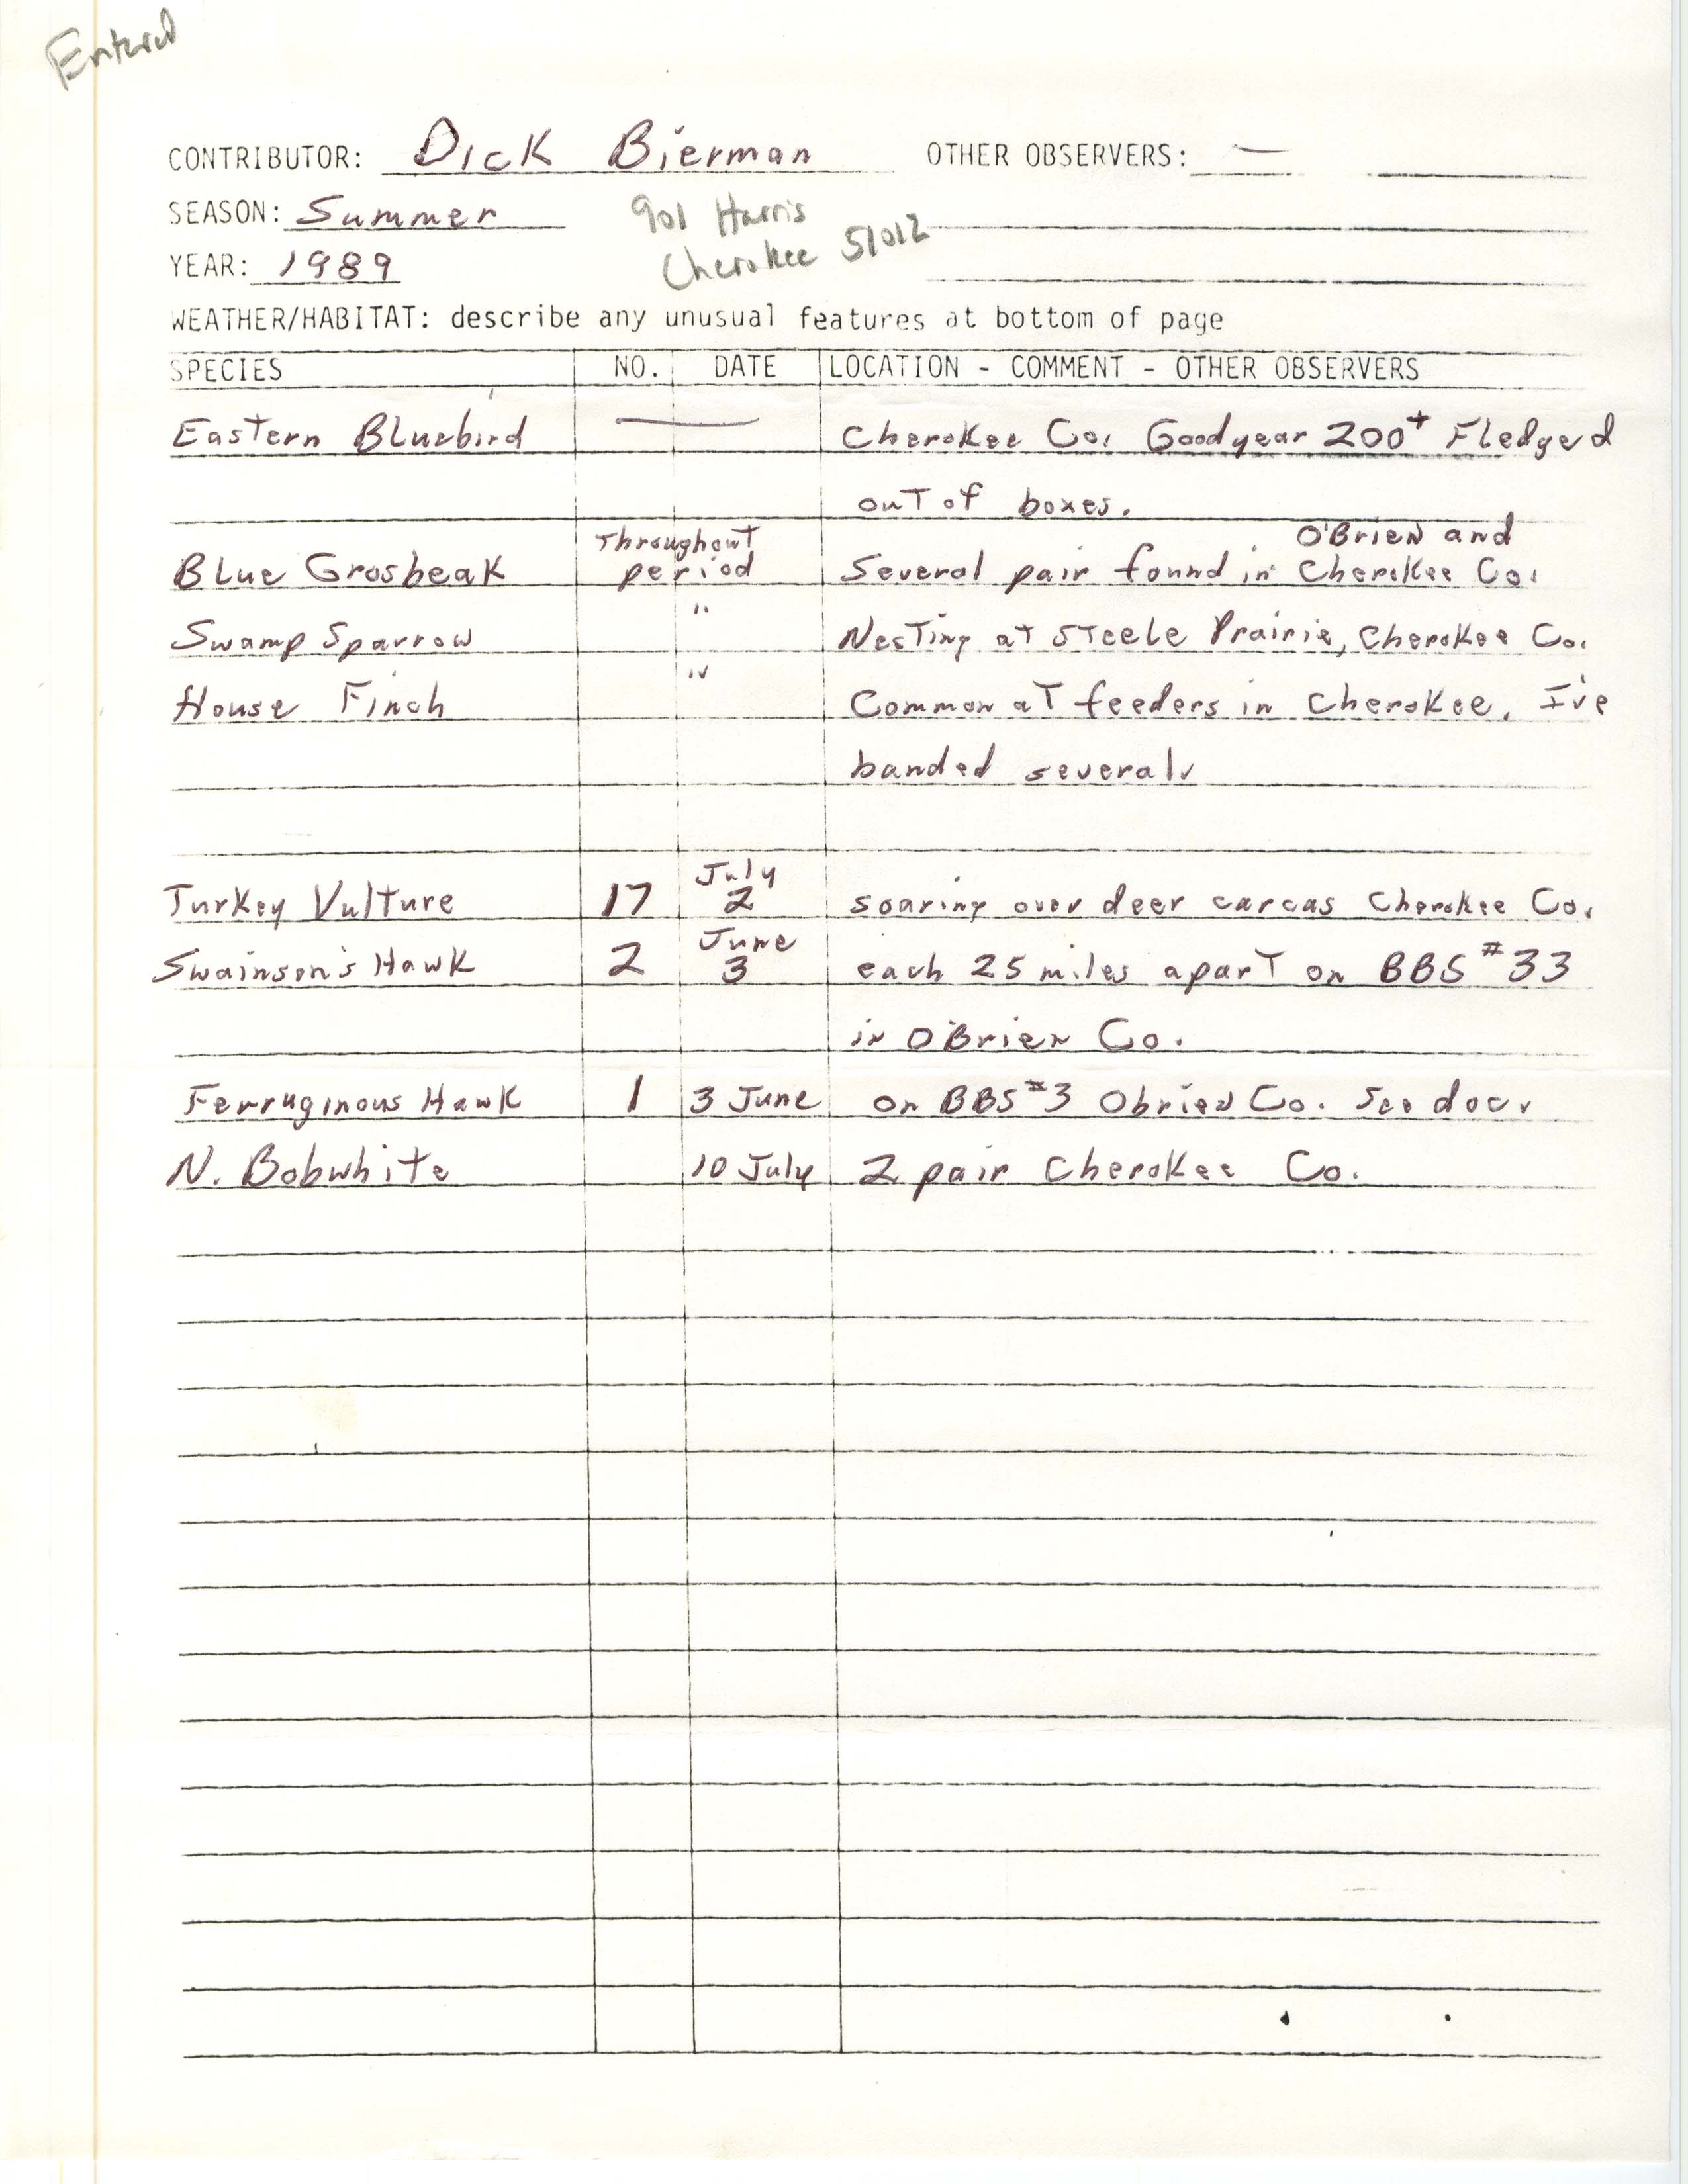 Field notes contributed by Dick Bierman, summer 1989